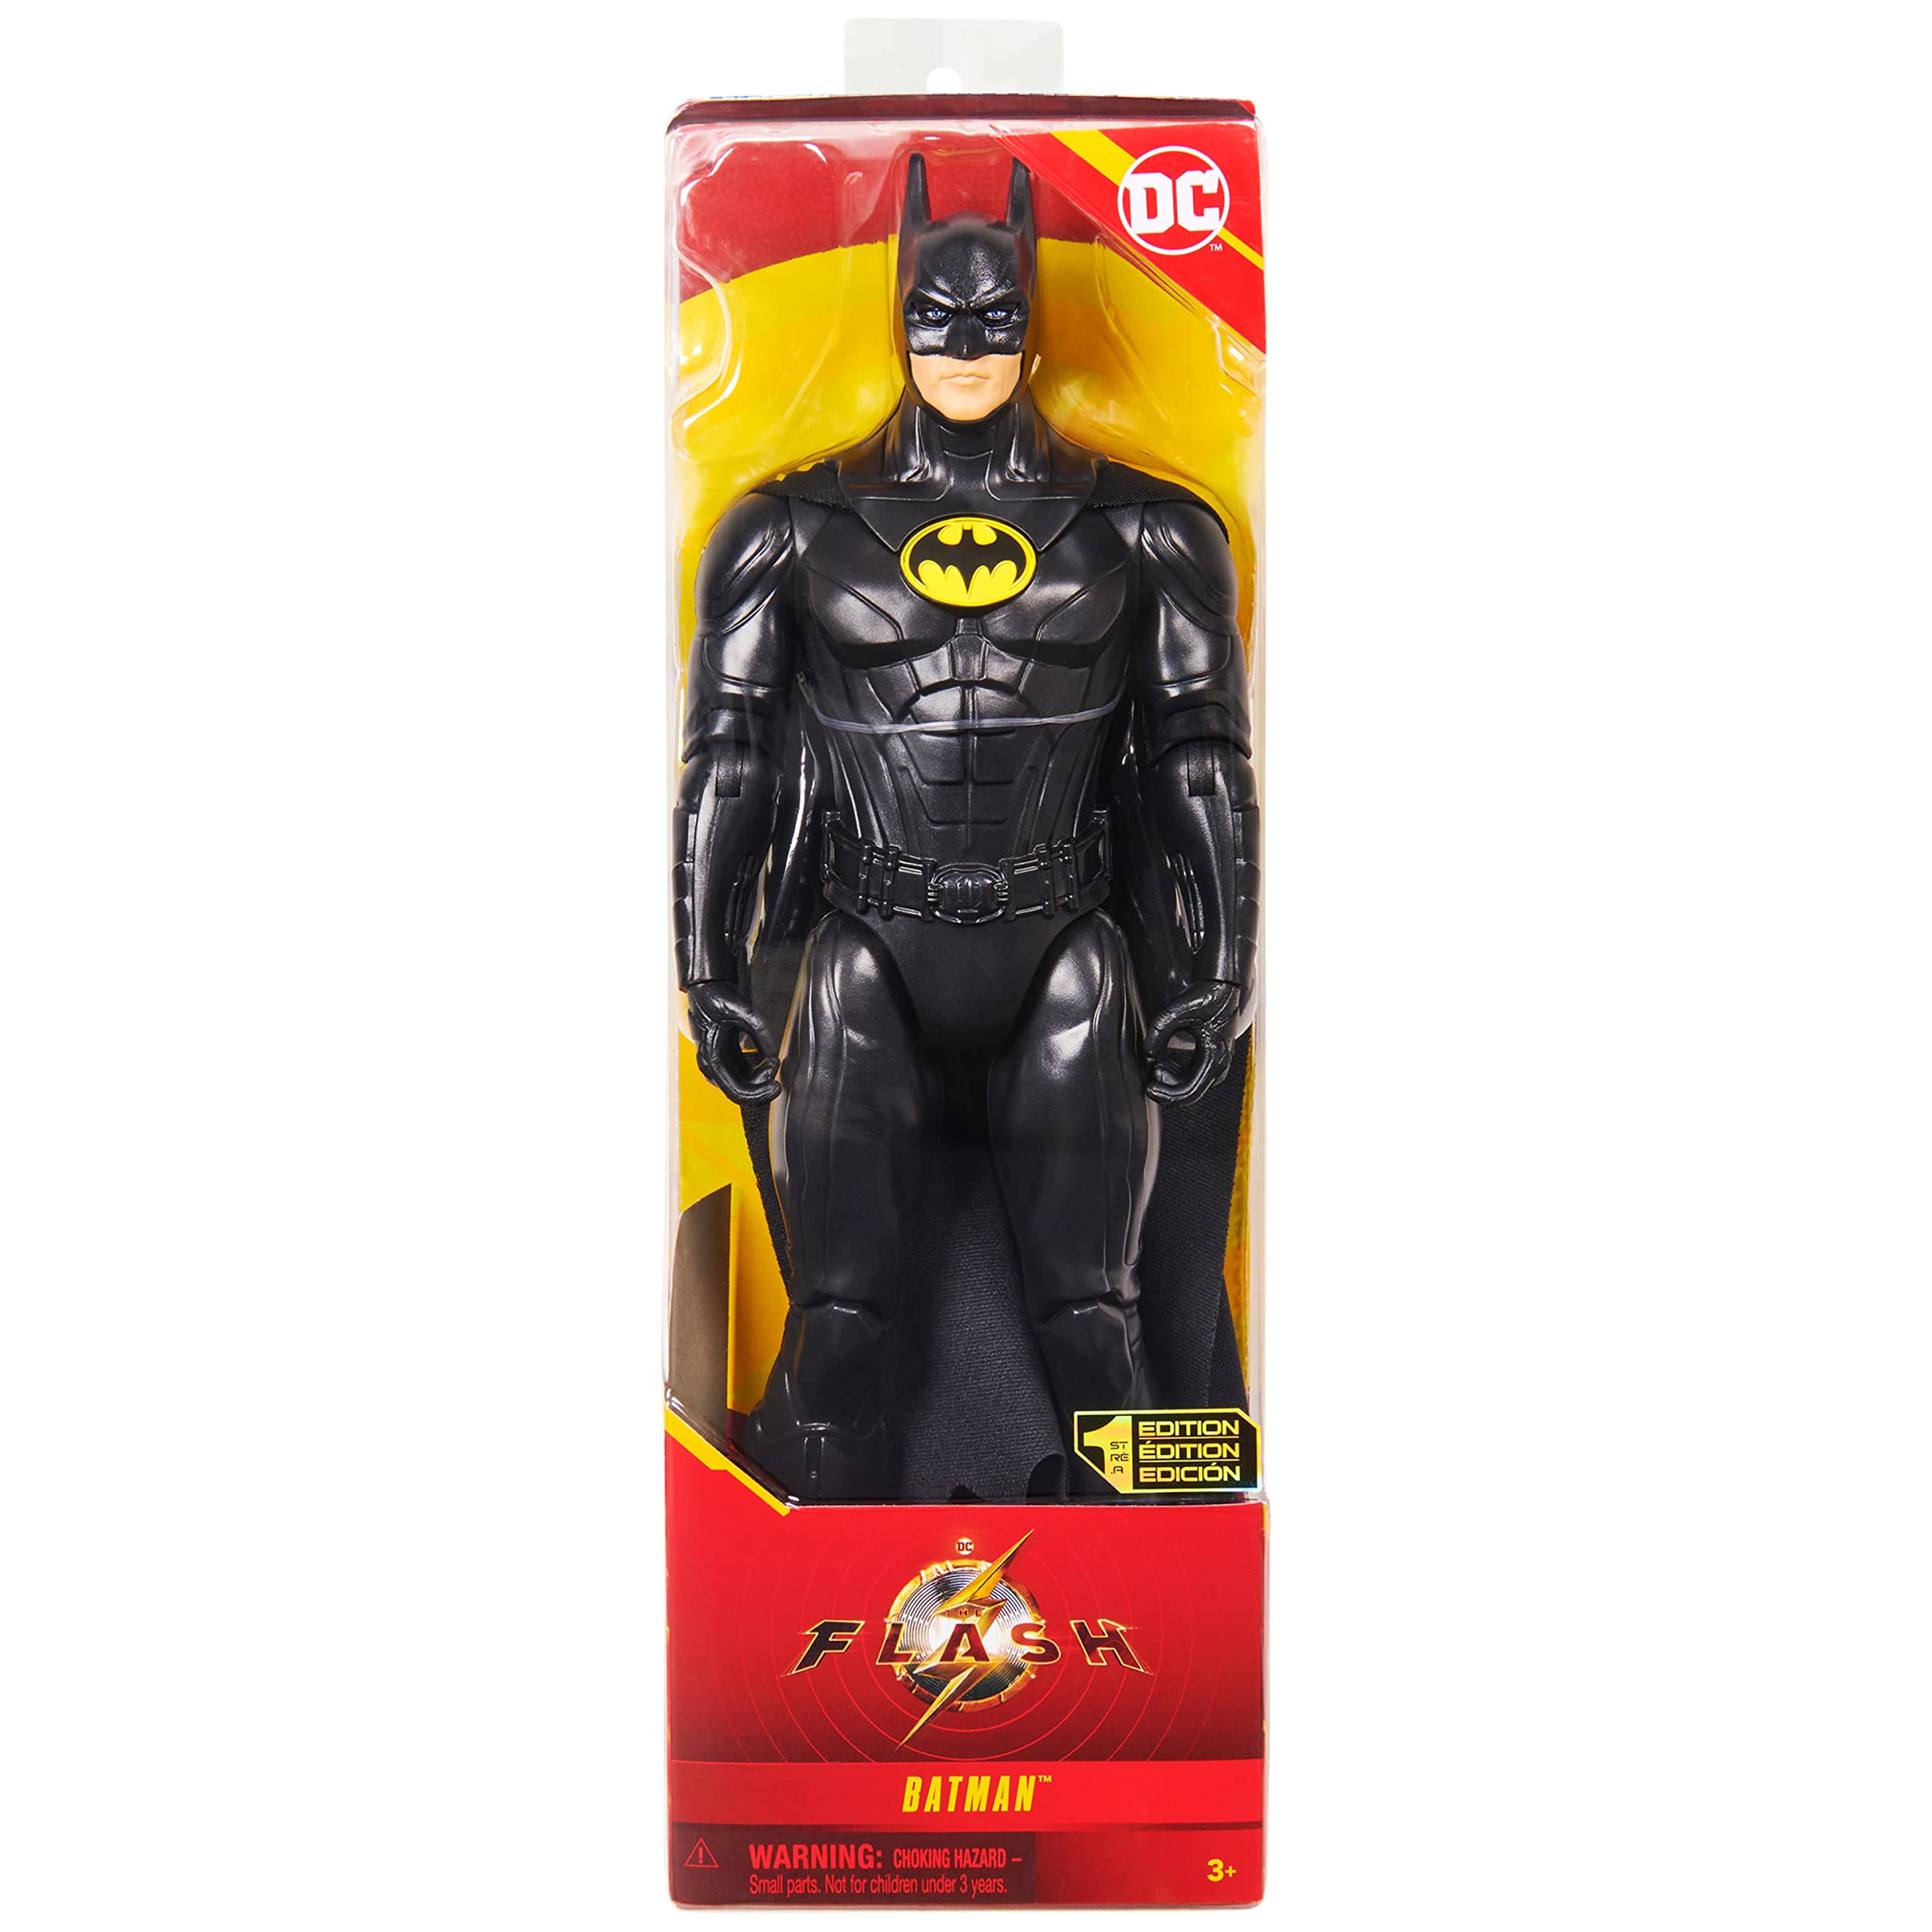 DC Comics, Batman Action Figure, 12-inch The Flash Movie Collectible, Kids Toys for Boys and Girls Ages 3 and up